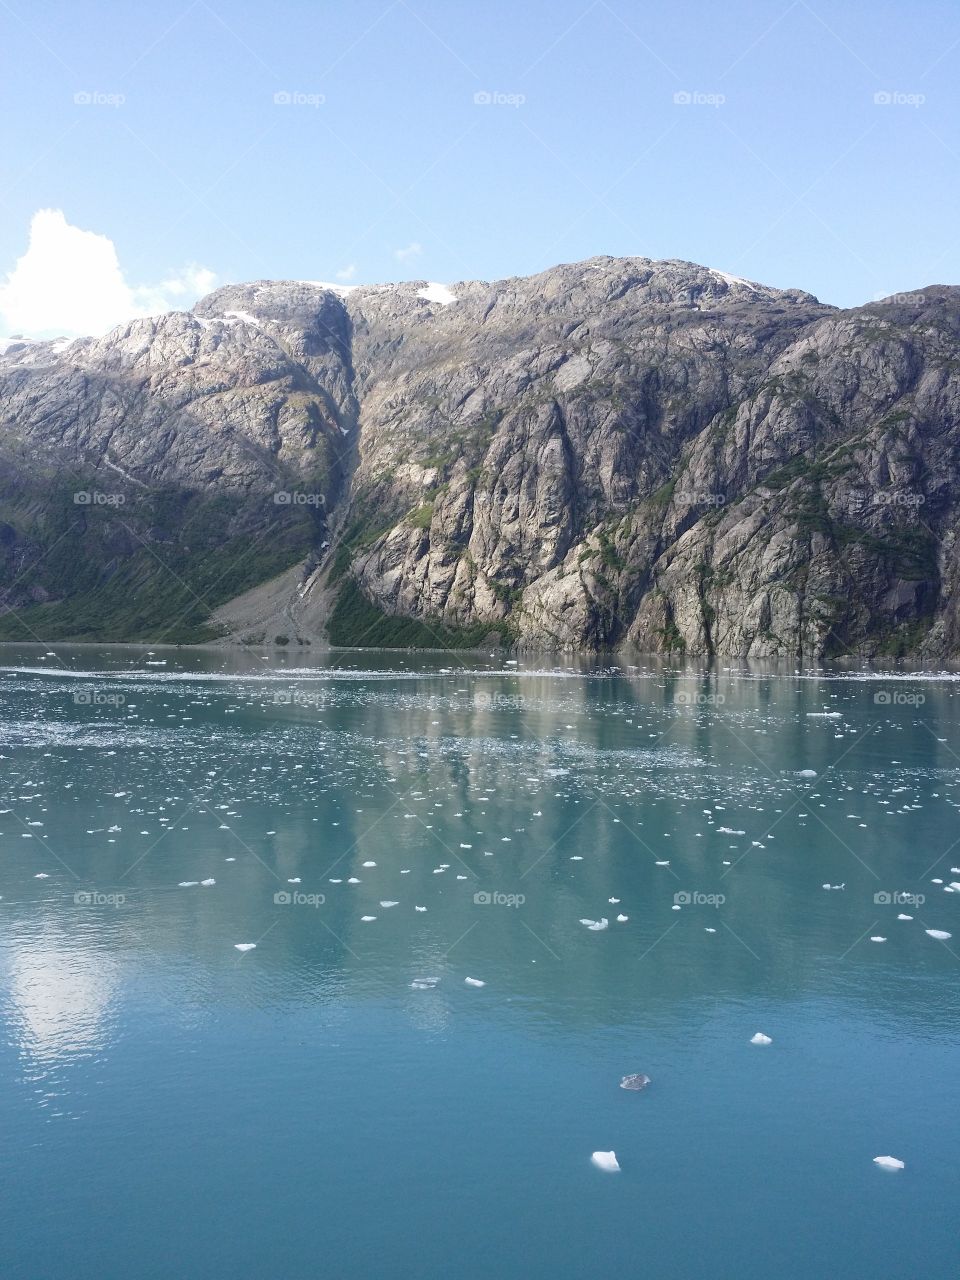 Glacier Bay National Park 
Breath taking mountains and little pieces of glacier floating in the water.
Alaska